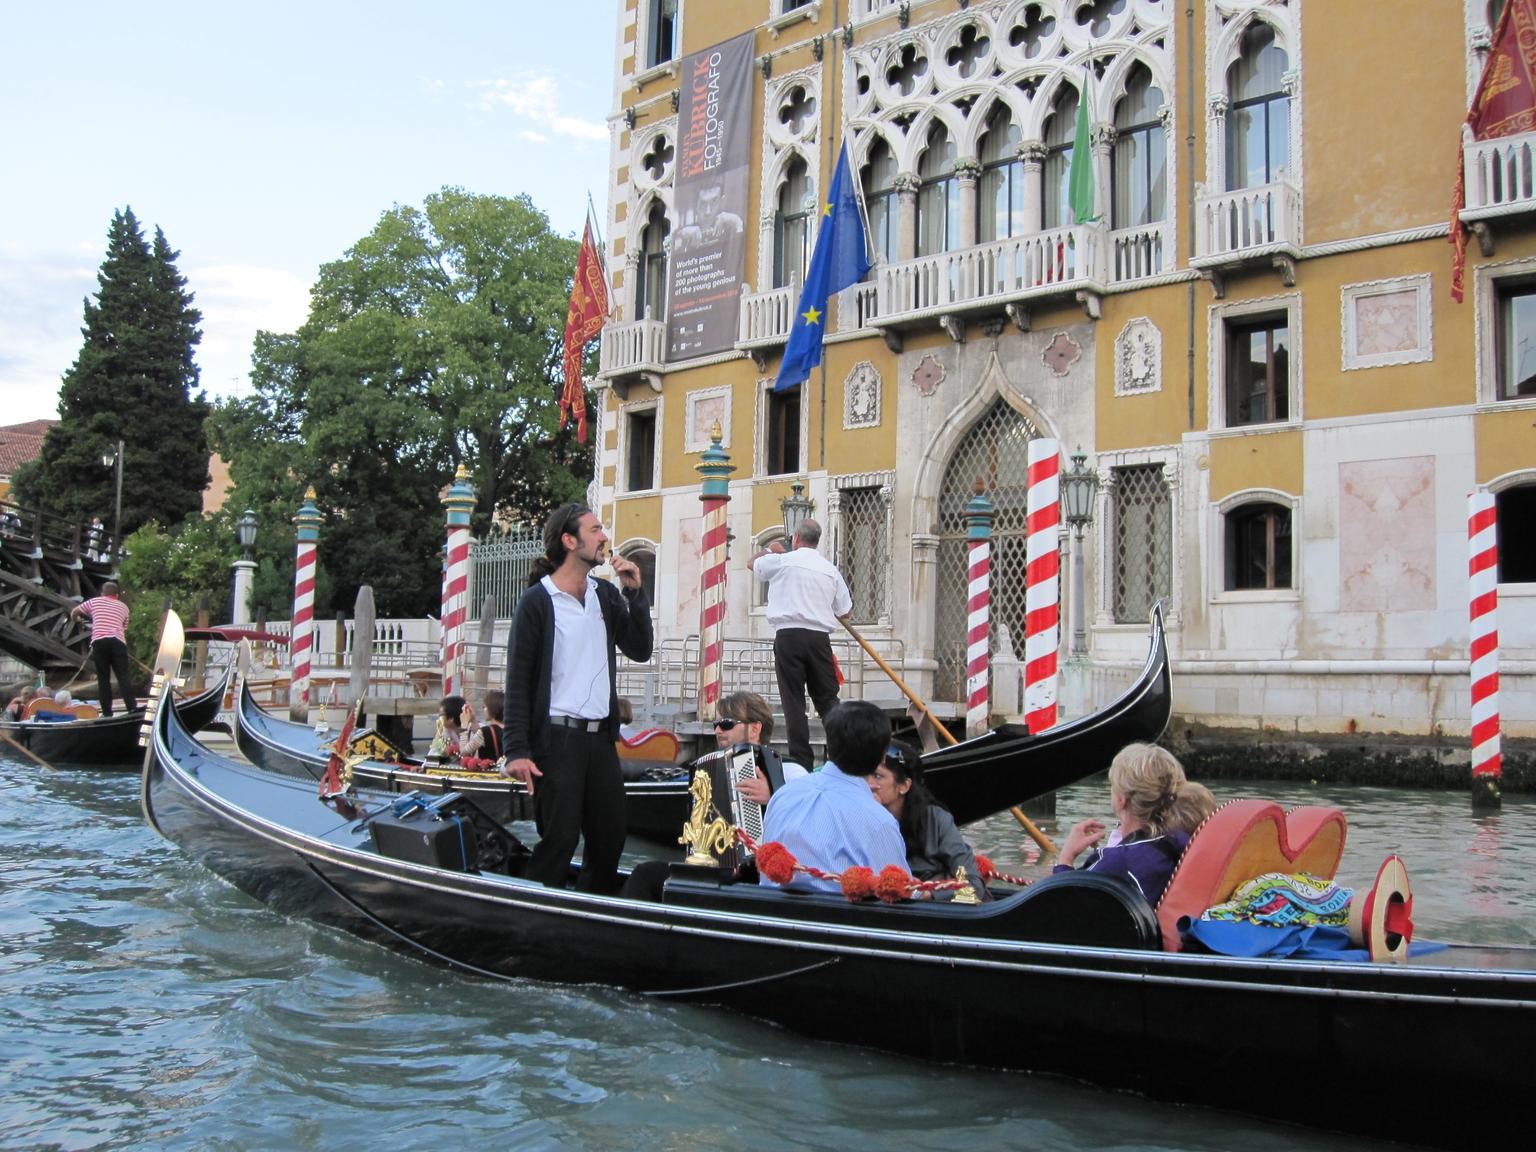 Singer and accordion player on Grande Canale, Venezia